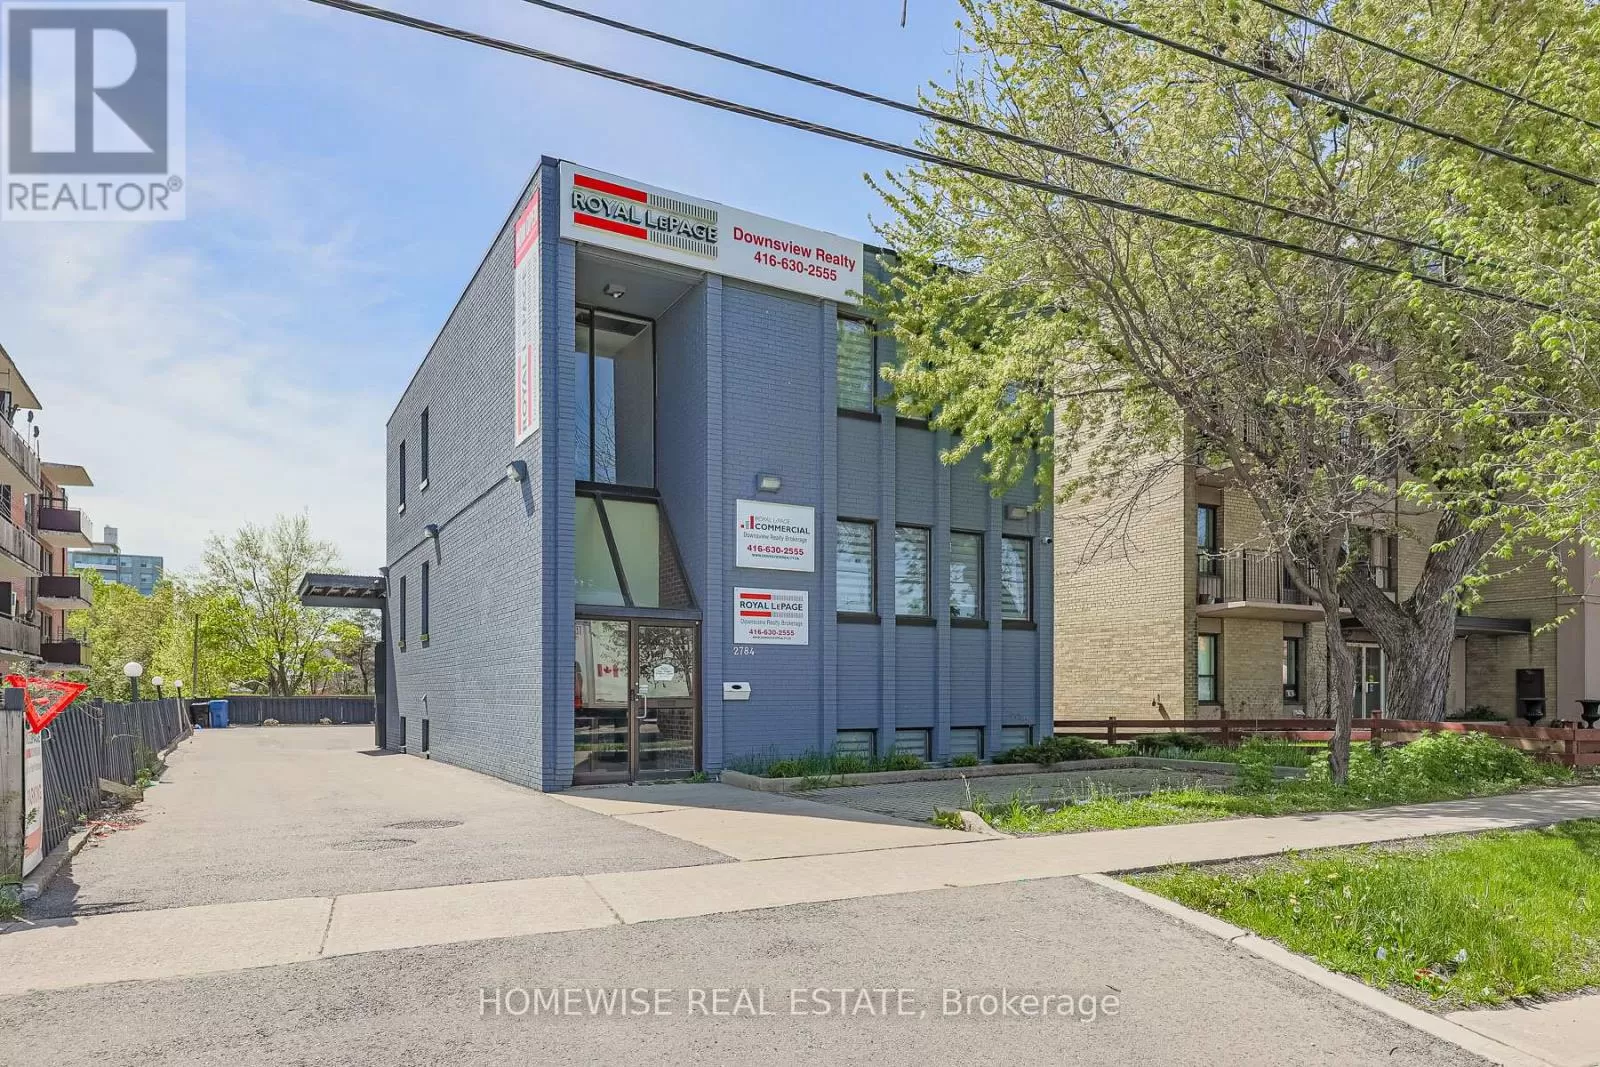 Offices for rent: 2784 Keele Street, Toronto, Ontario M3M 2G2